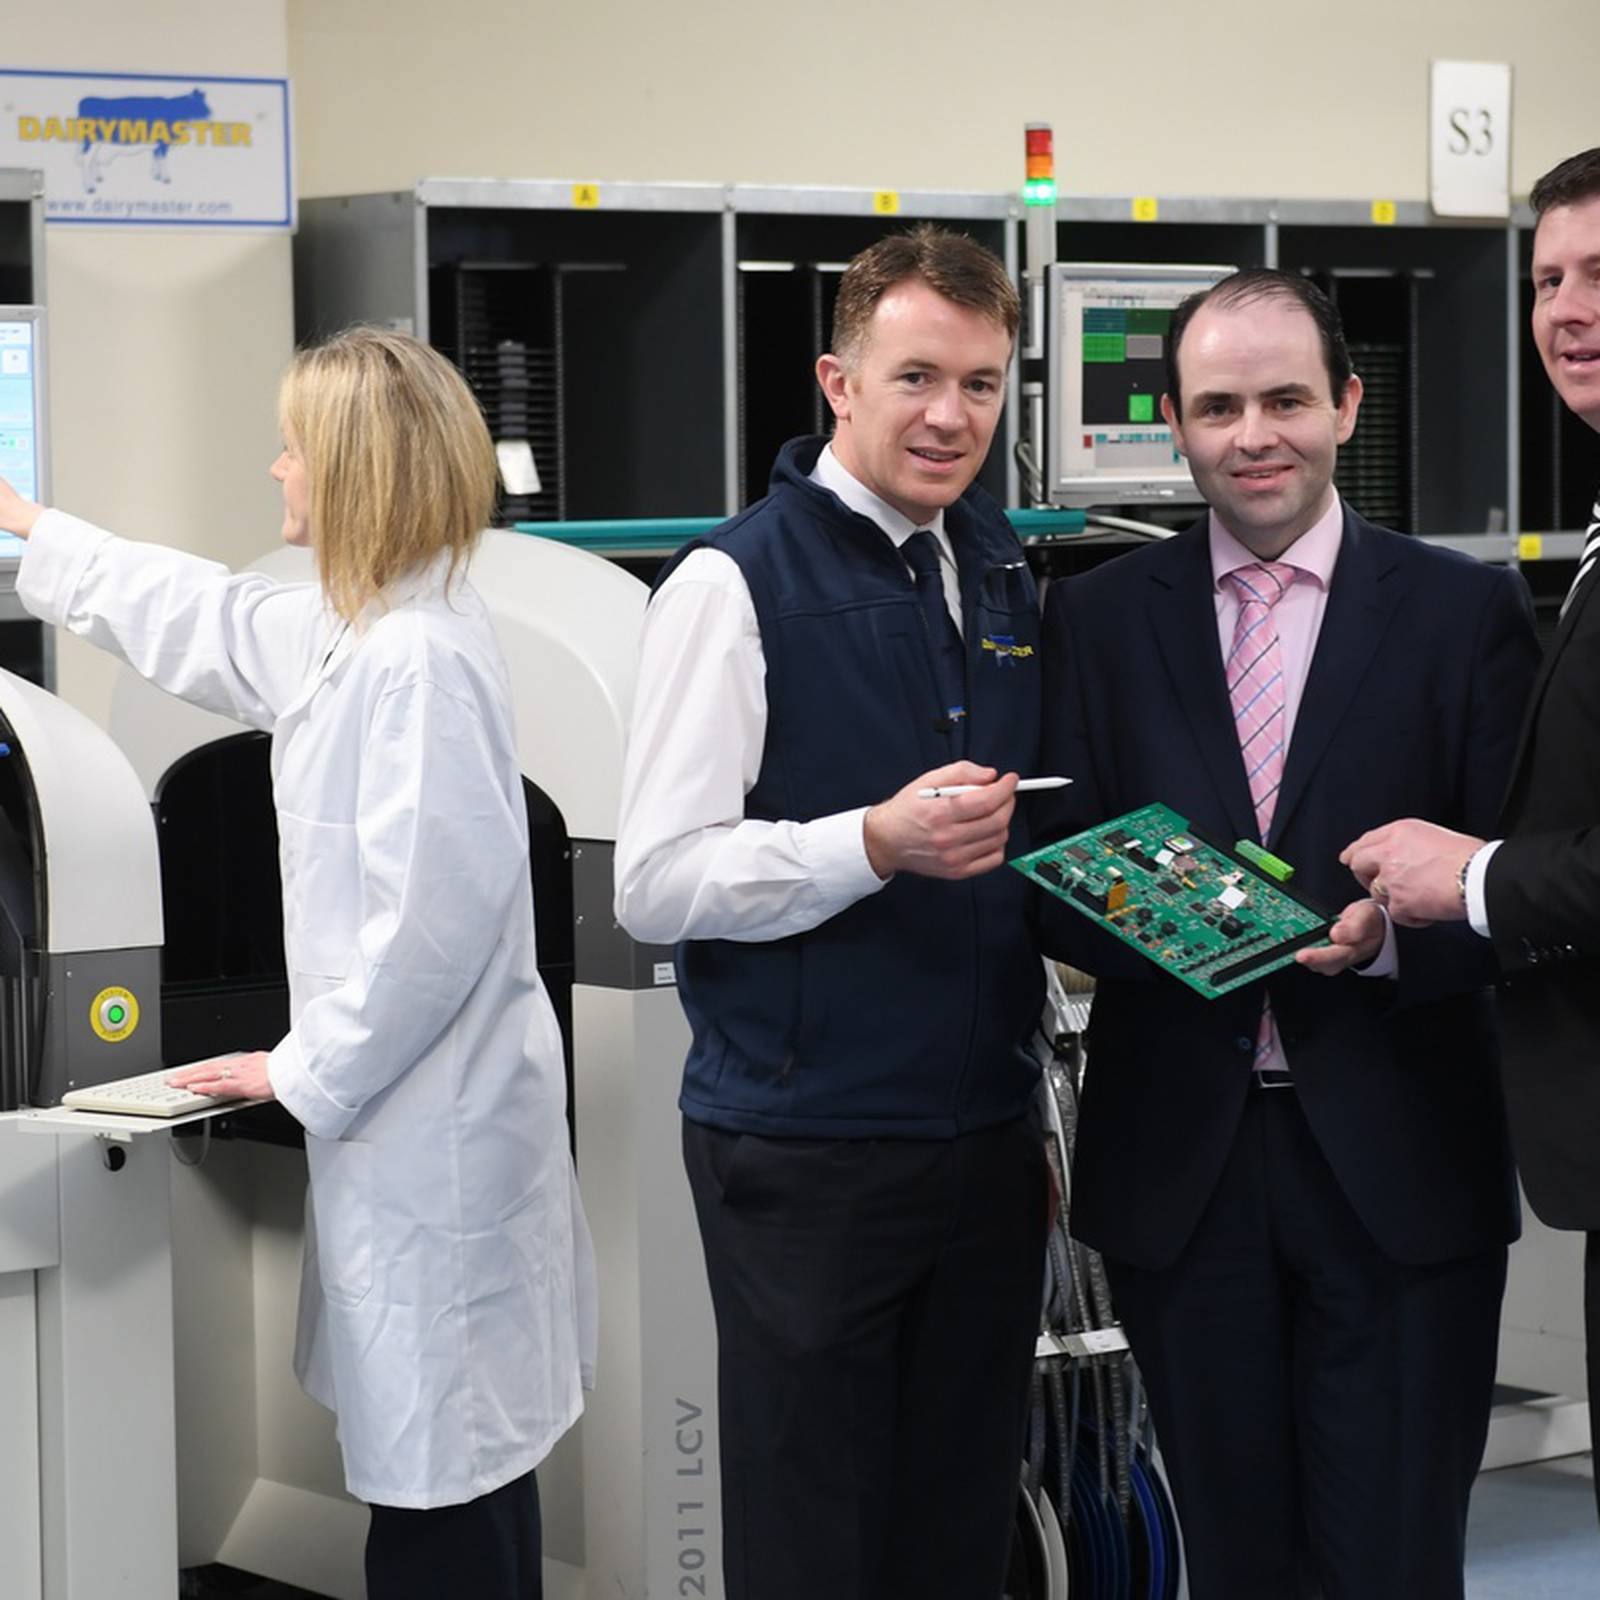 Farmers tap into AI thanks to €2m deal between Dairymaster, Lero